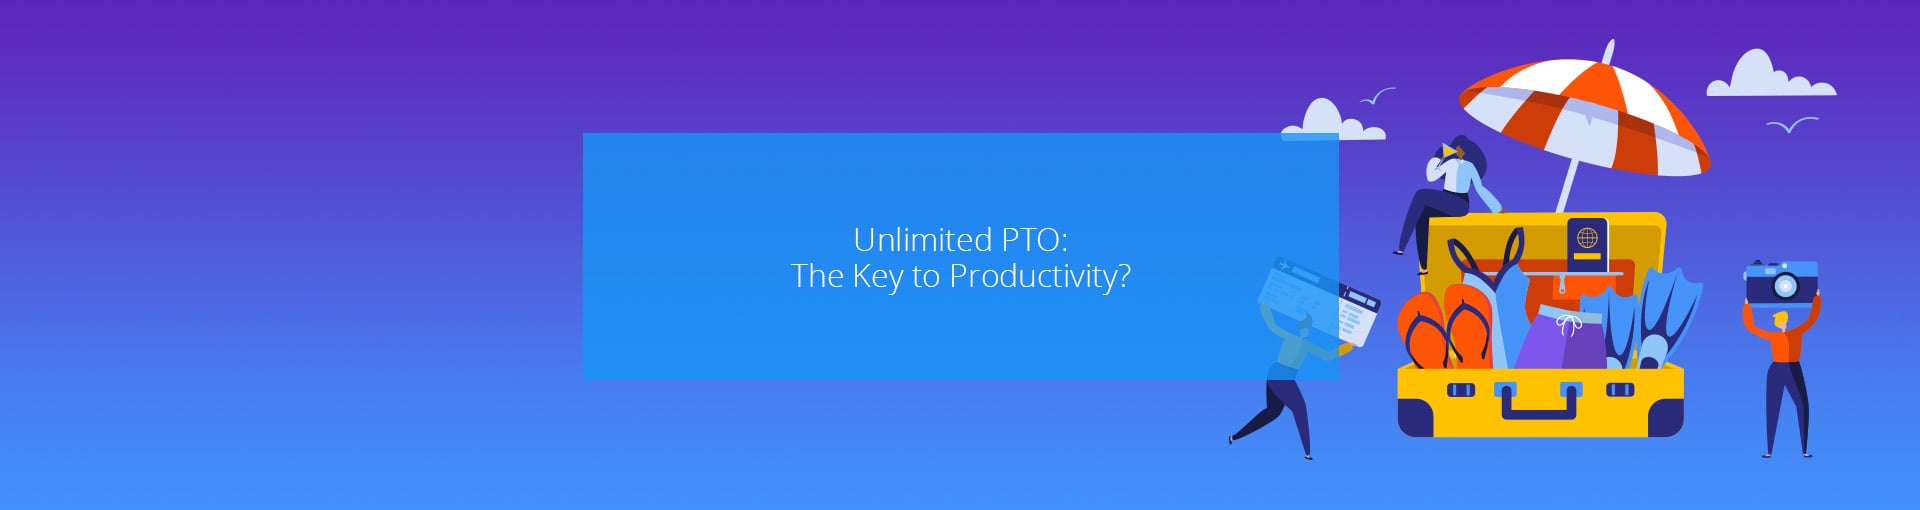 Unlimited PTO: The Key to Productivity? Featured Image